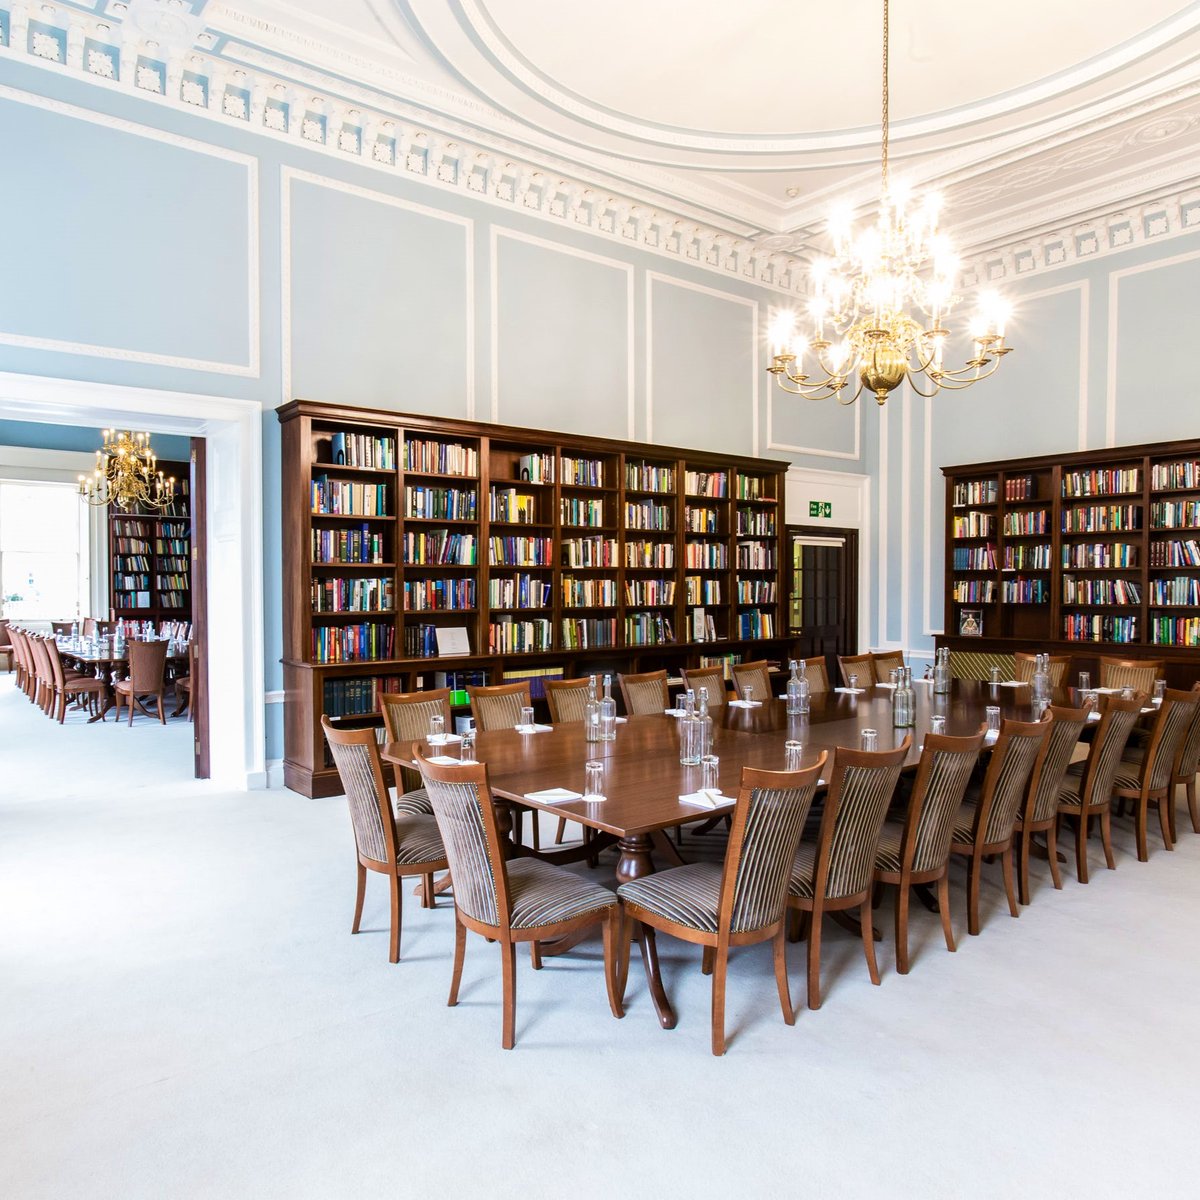 30 of London's best meeting rooms for hire🖊️ Whether you're looking to host a small group in a boardroom or impress clients in a fantastic restaurant, this list has it all. bit.ly/3gx7QCC